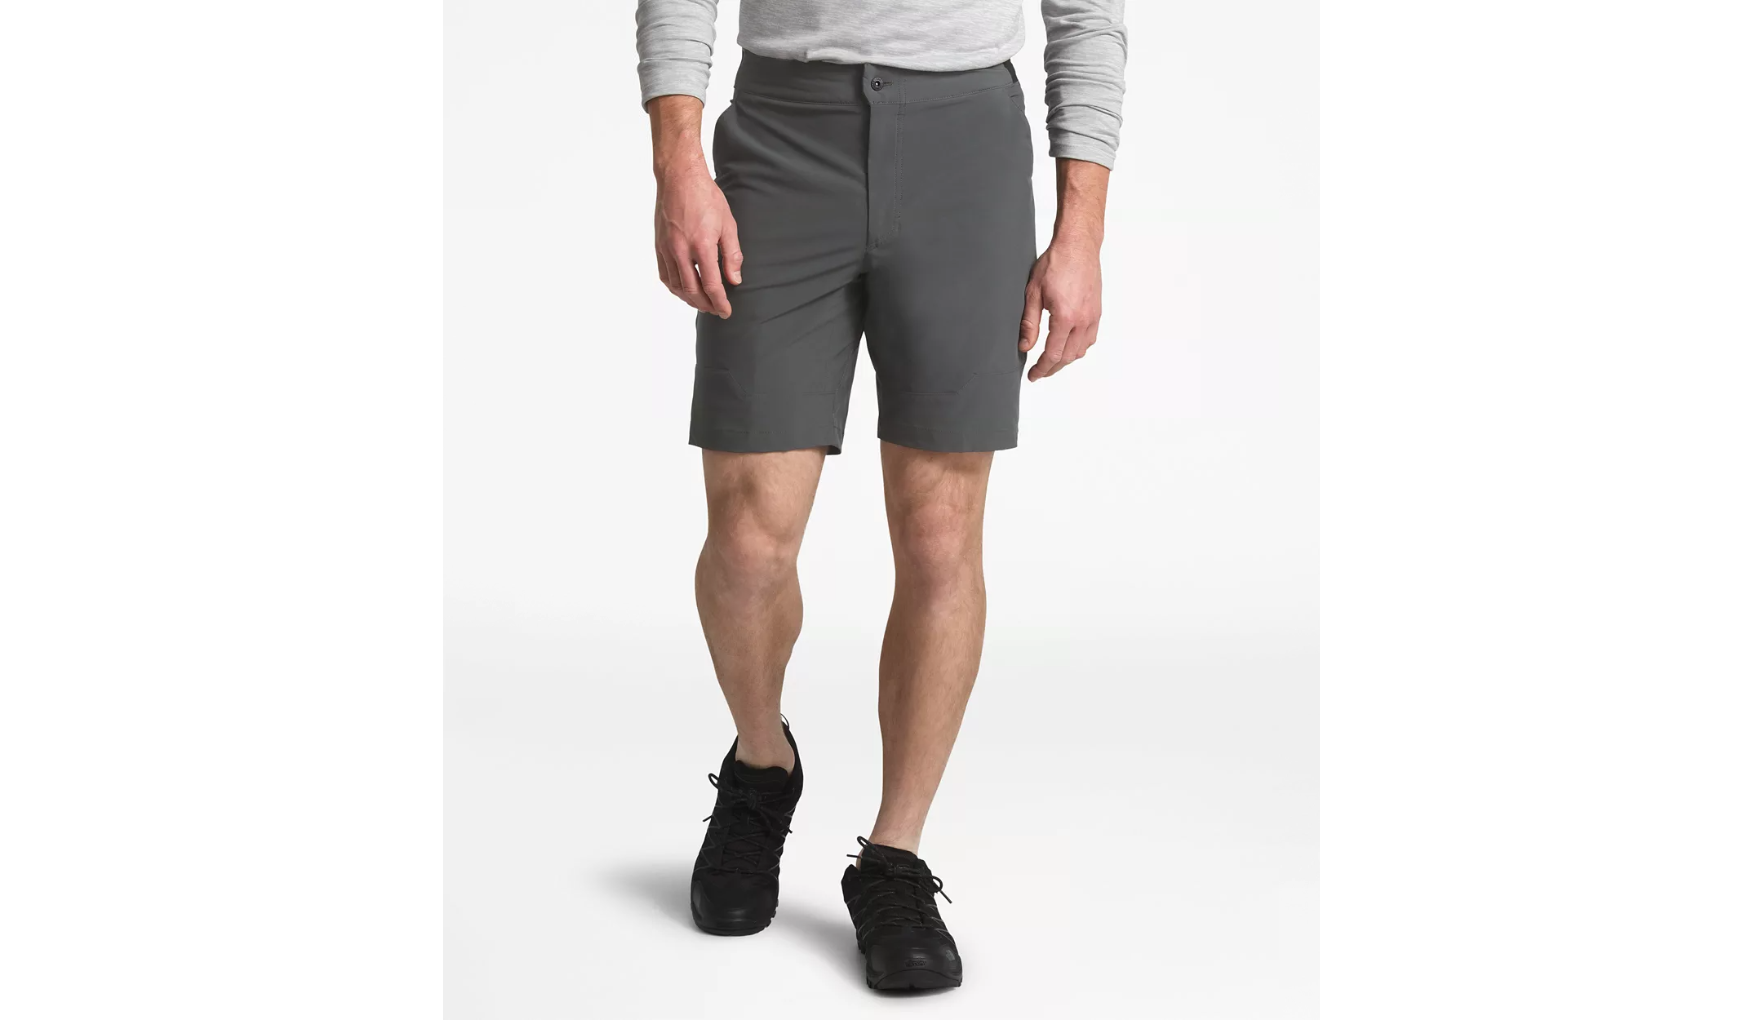 The North Face Men's Paramount Active Short